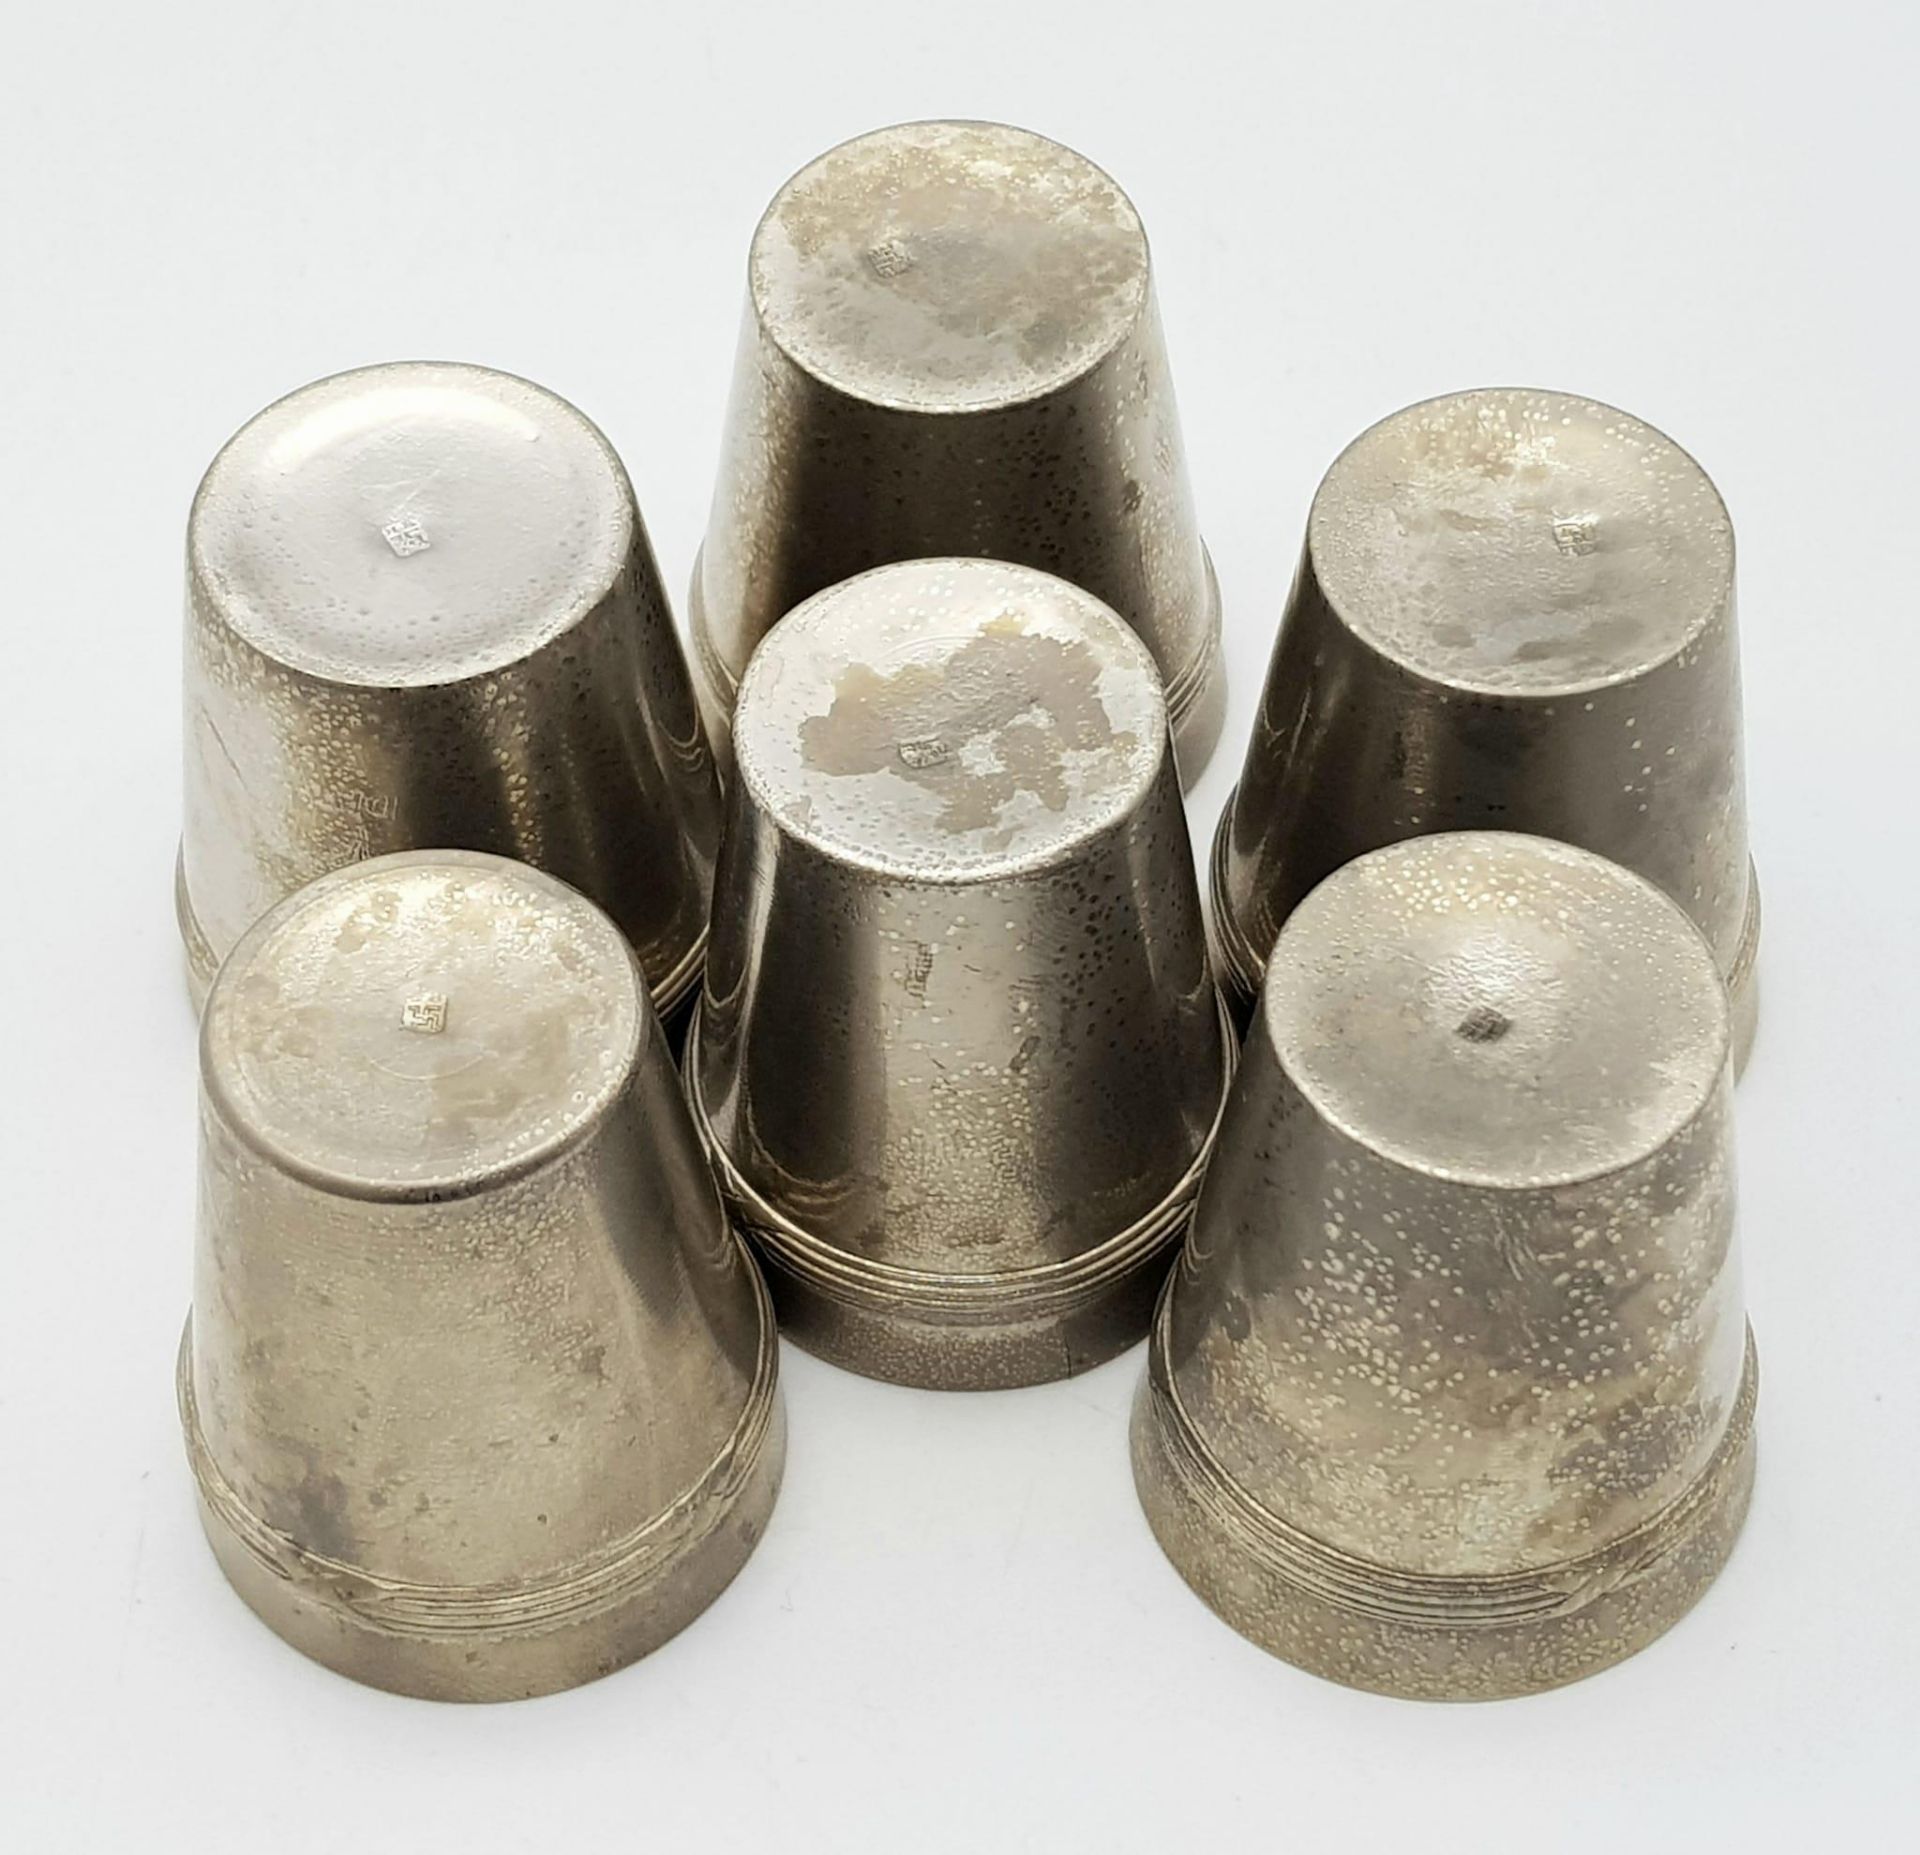 6 x Silver Plated German Gebirgsjäger Division (Mountain Troops) Schnapps Cups. - Image 4 of 5